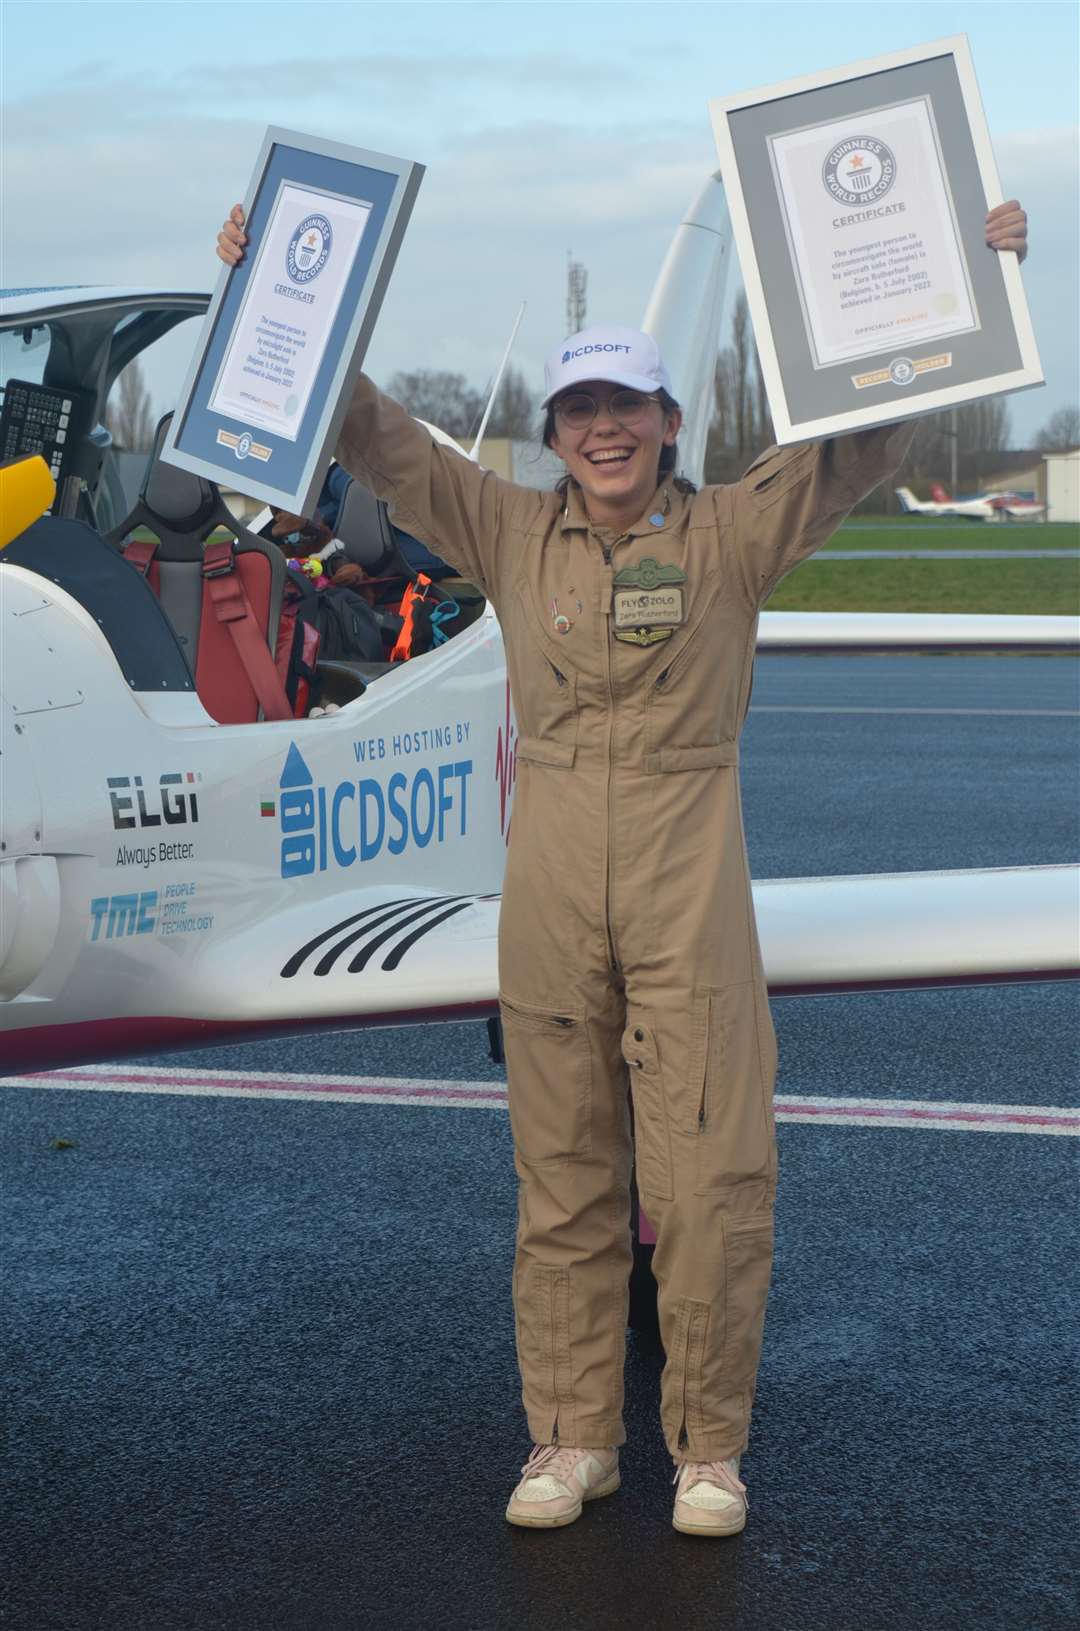 She now holds the record for the youngest woman to fly solo around the world.